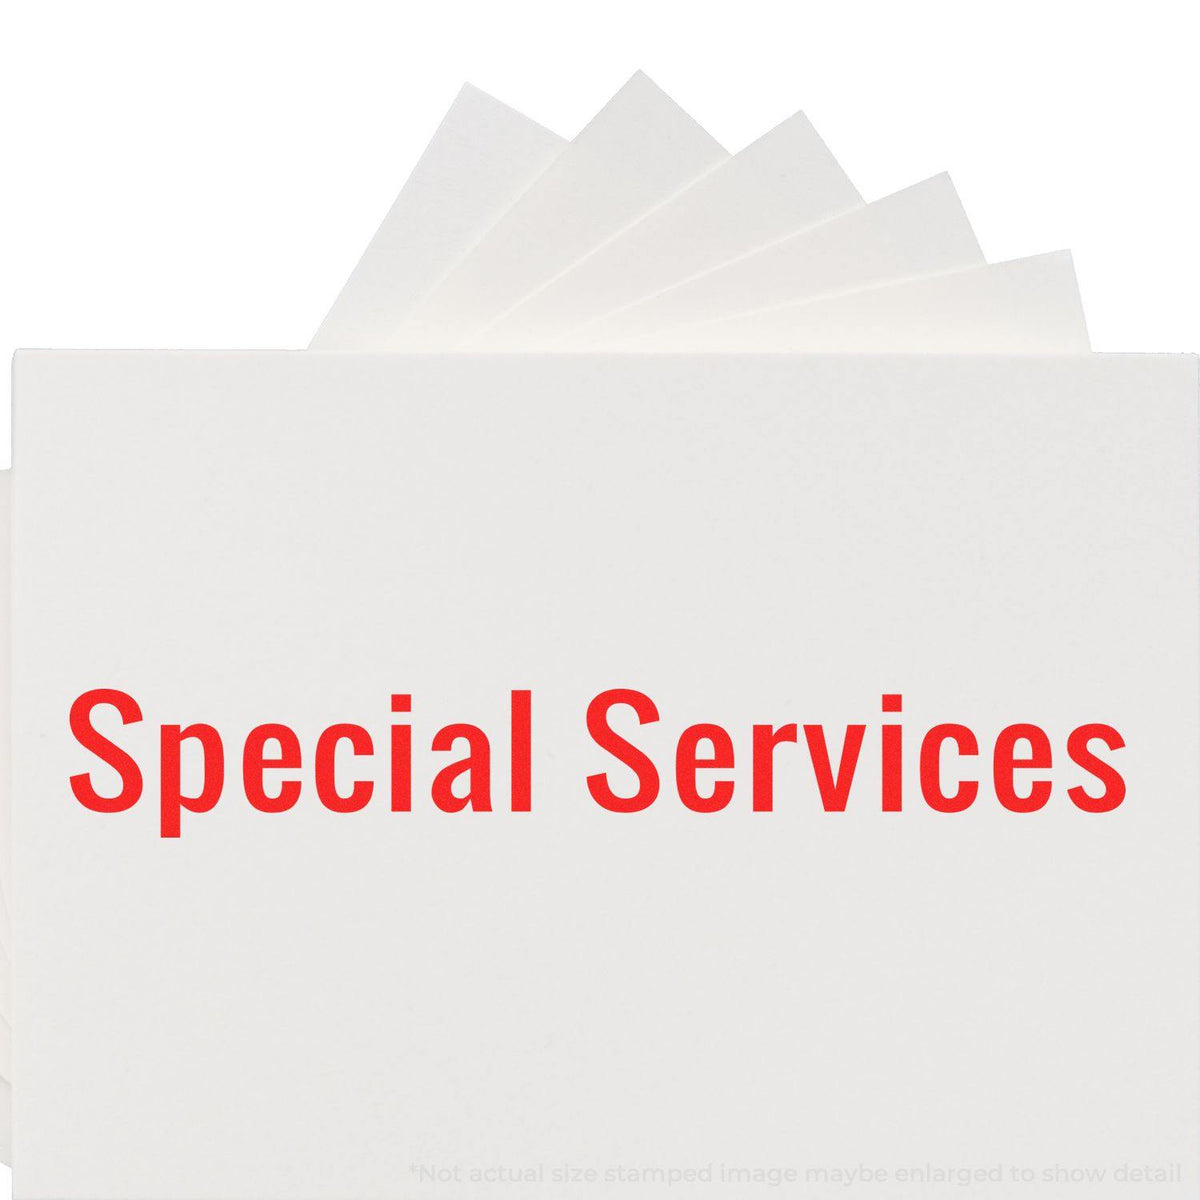 Special Services Rubber Stamp Lifestyle Photo